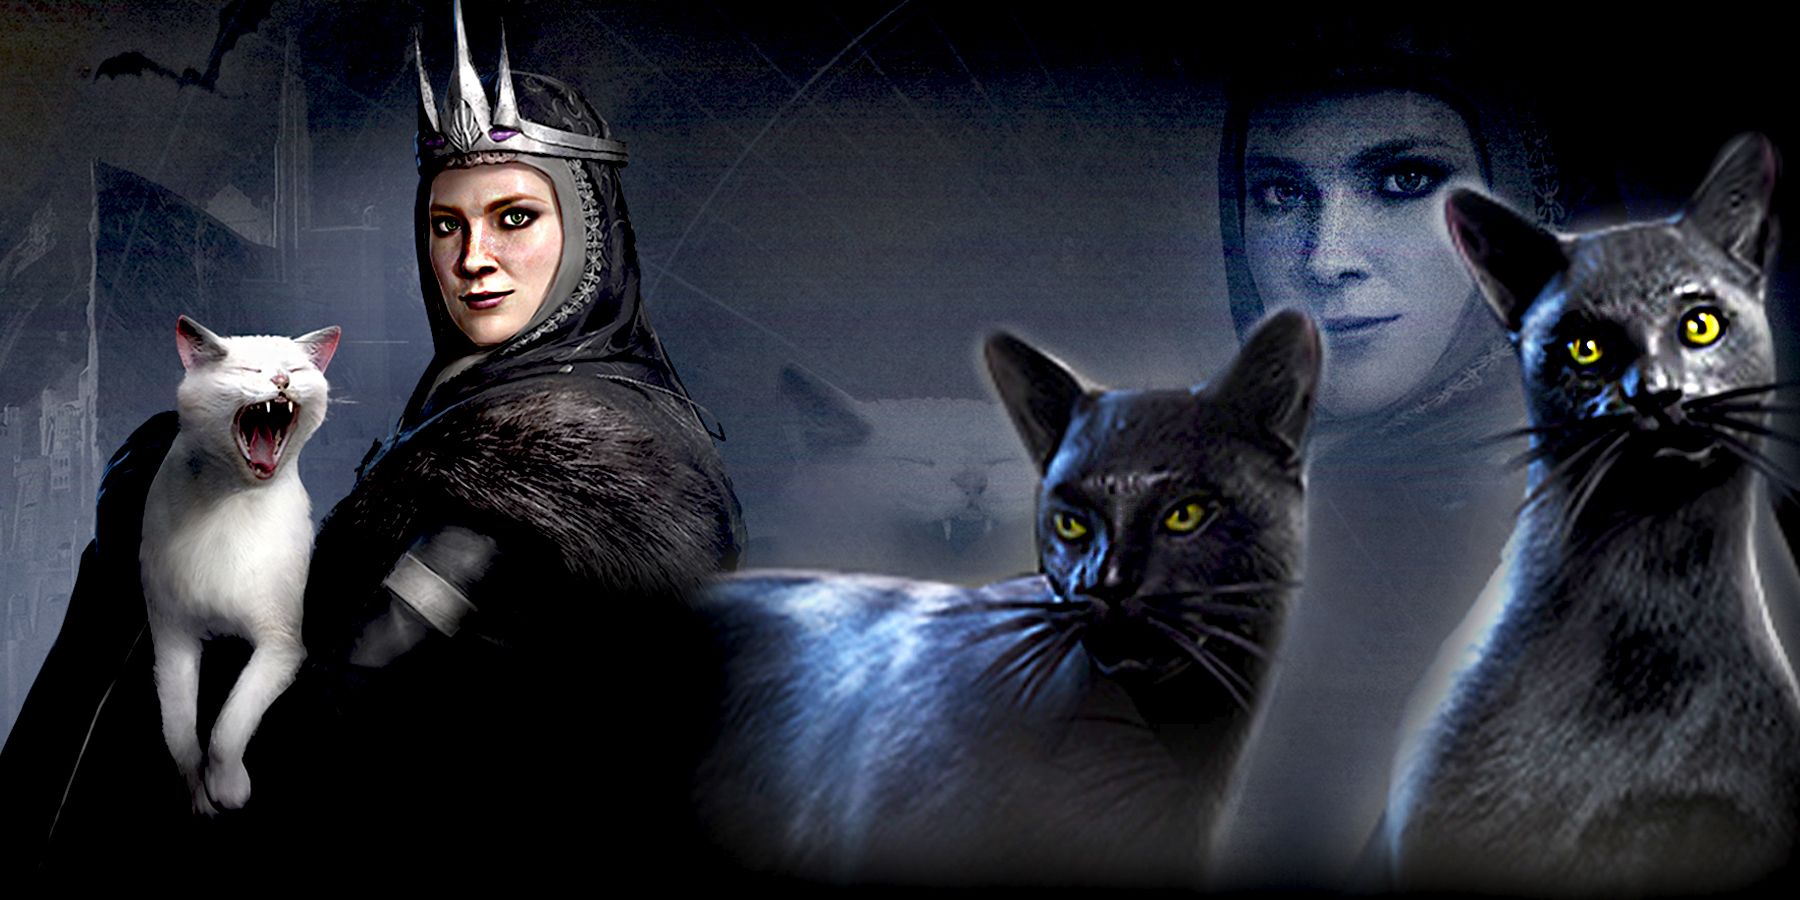 Queen Berúthiel surrounded by cats from The Lord of the Rings.